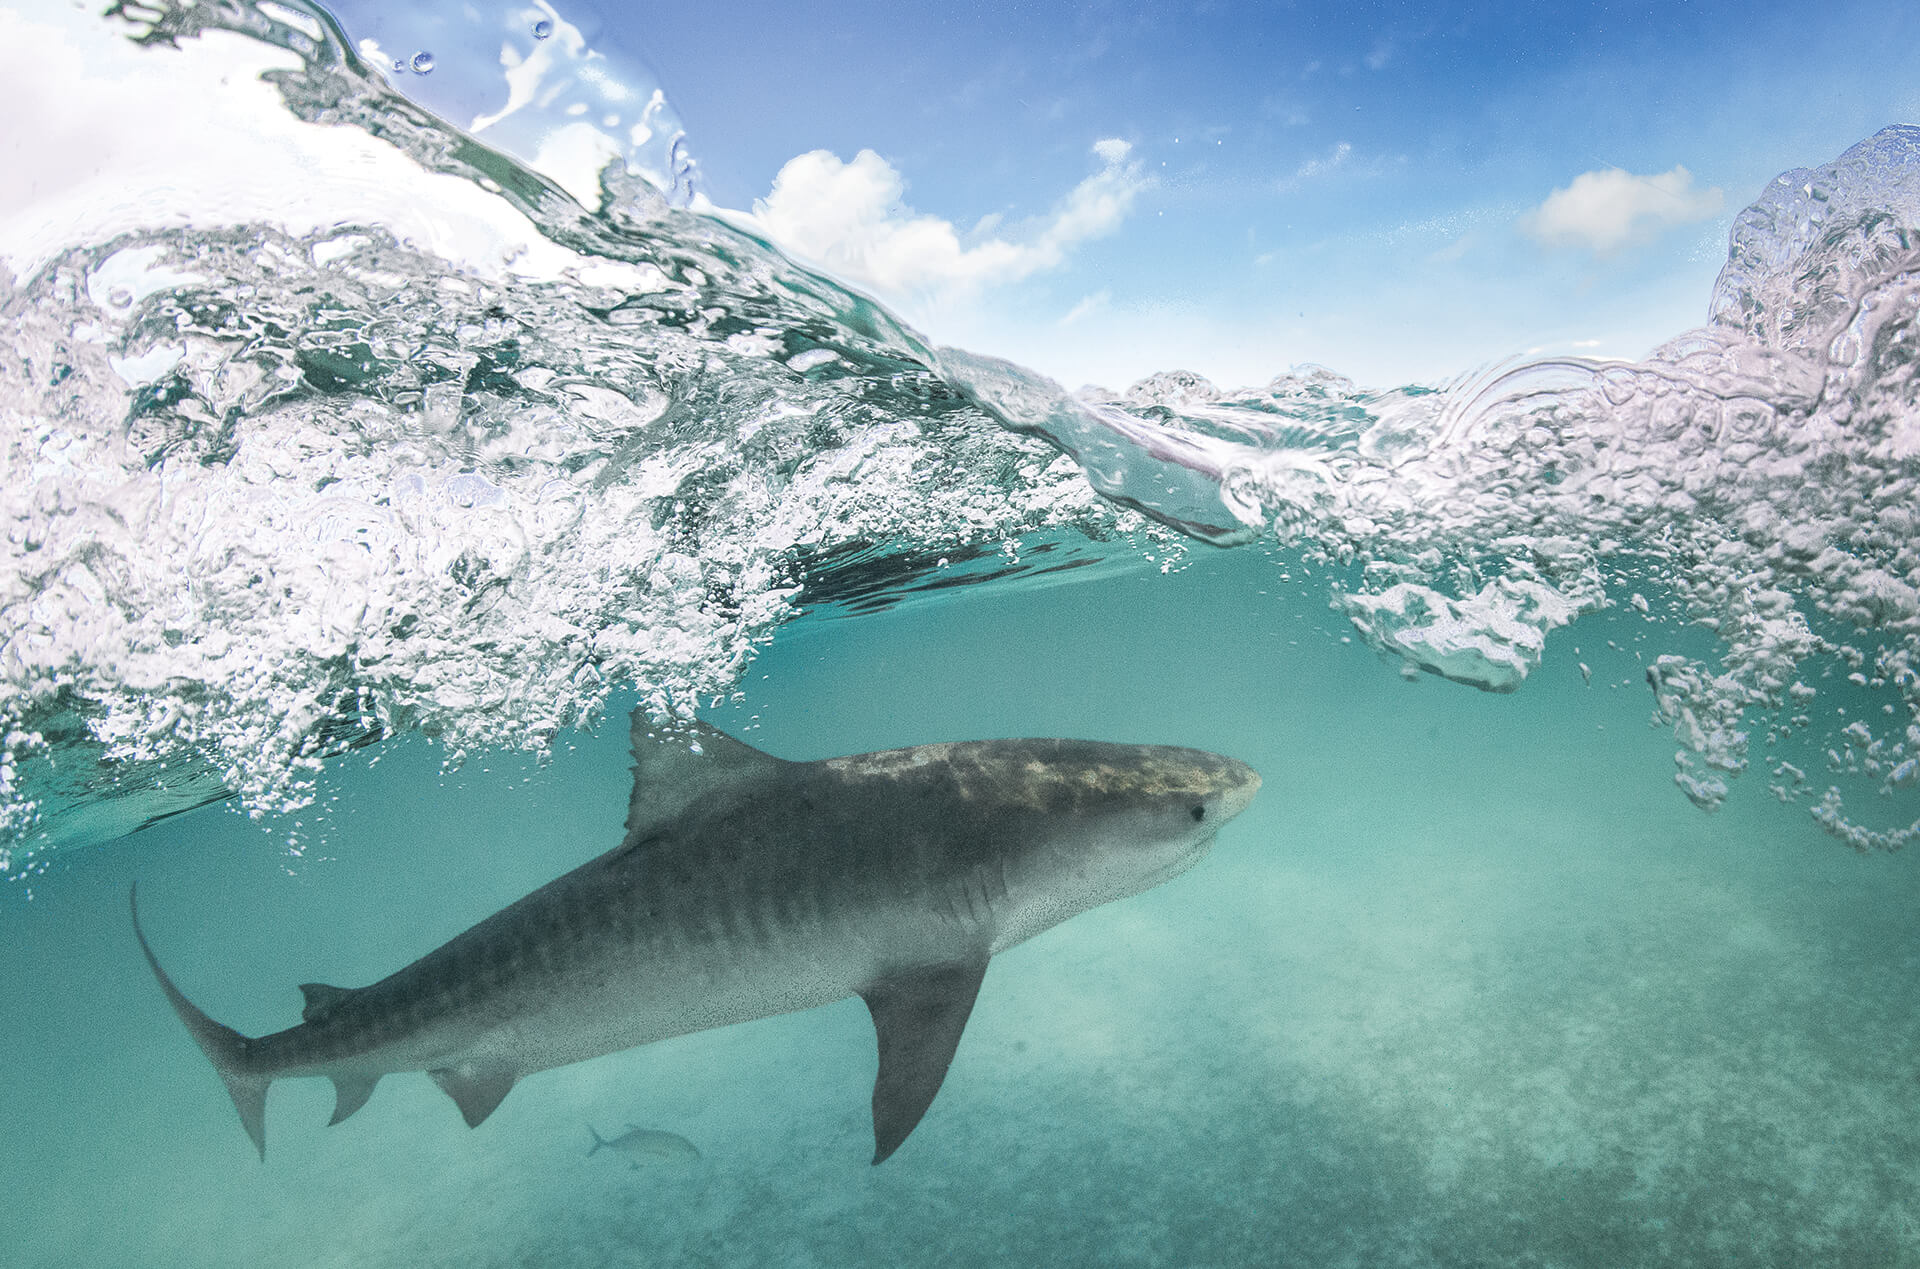 A tiger shark swims just below the surface of the water